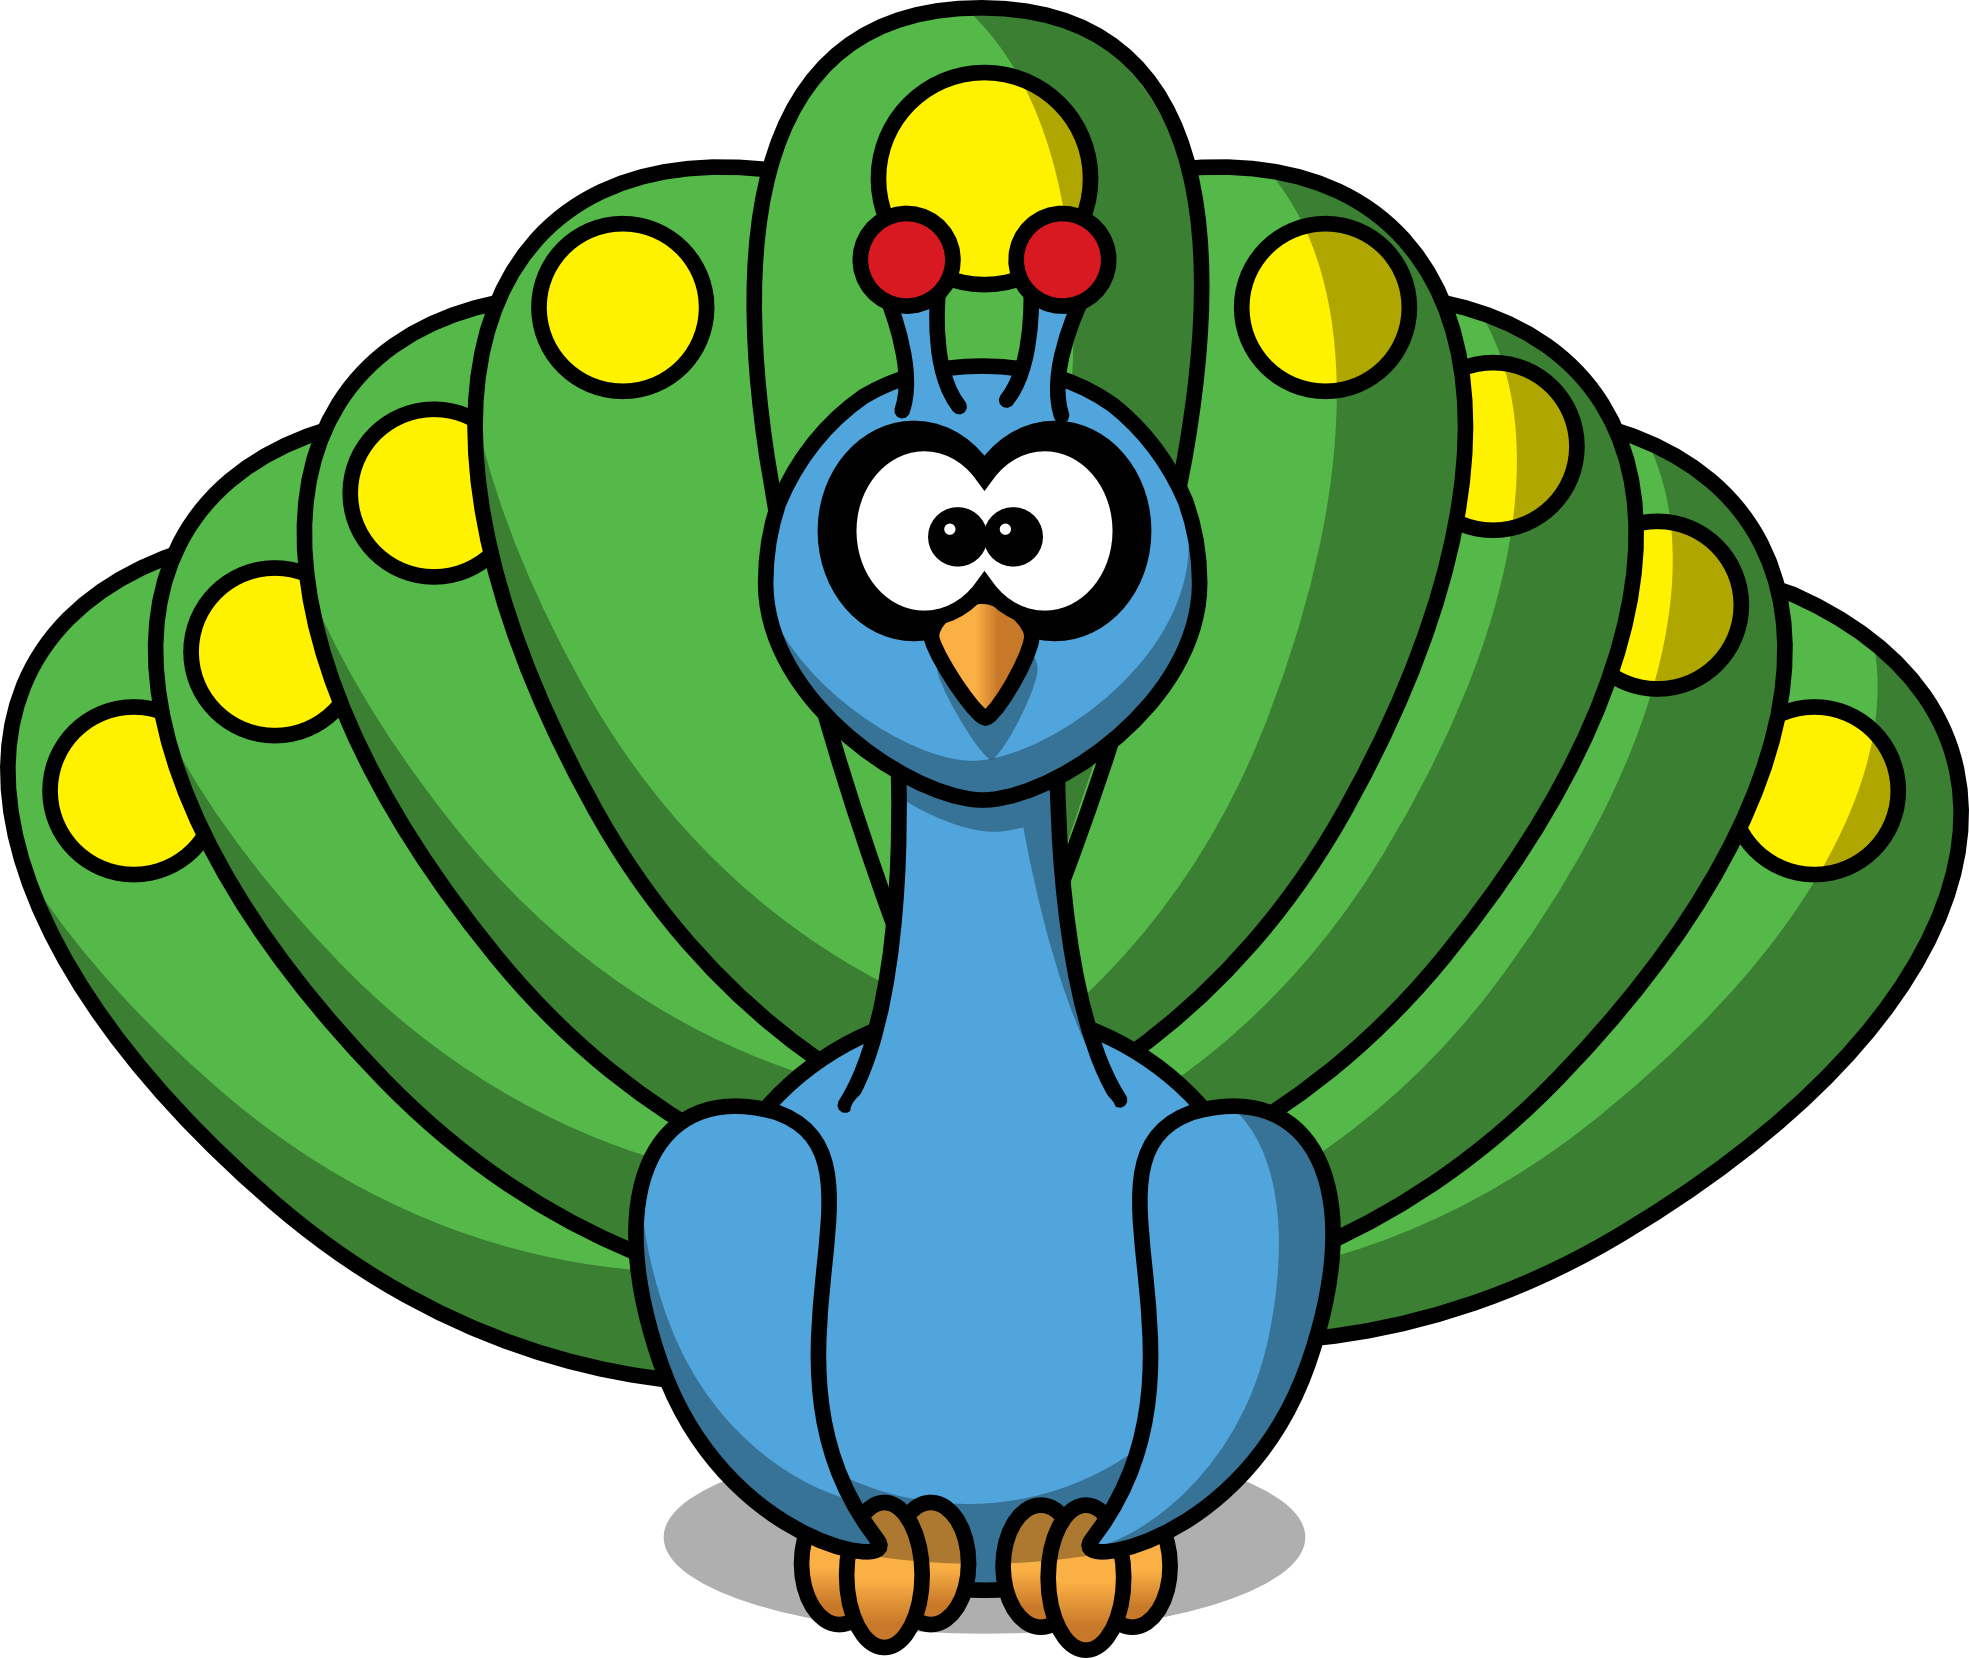 Peacock clipart free clipart images - Clipartix